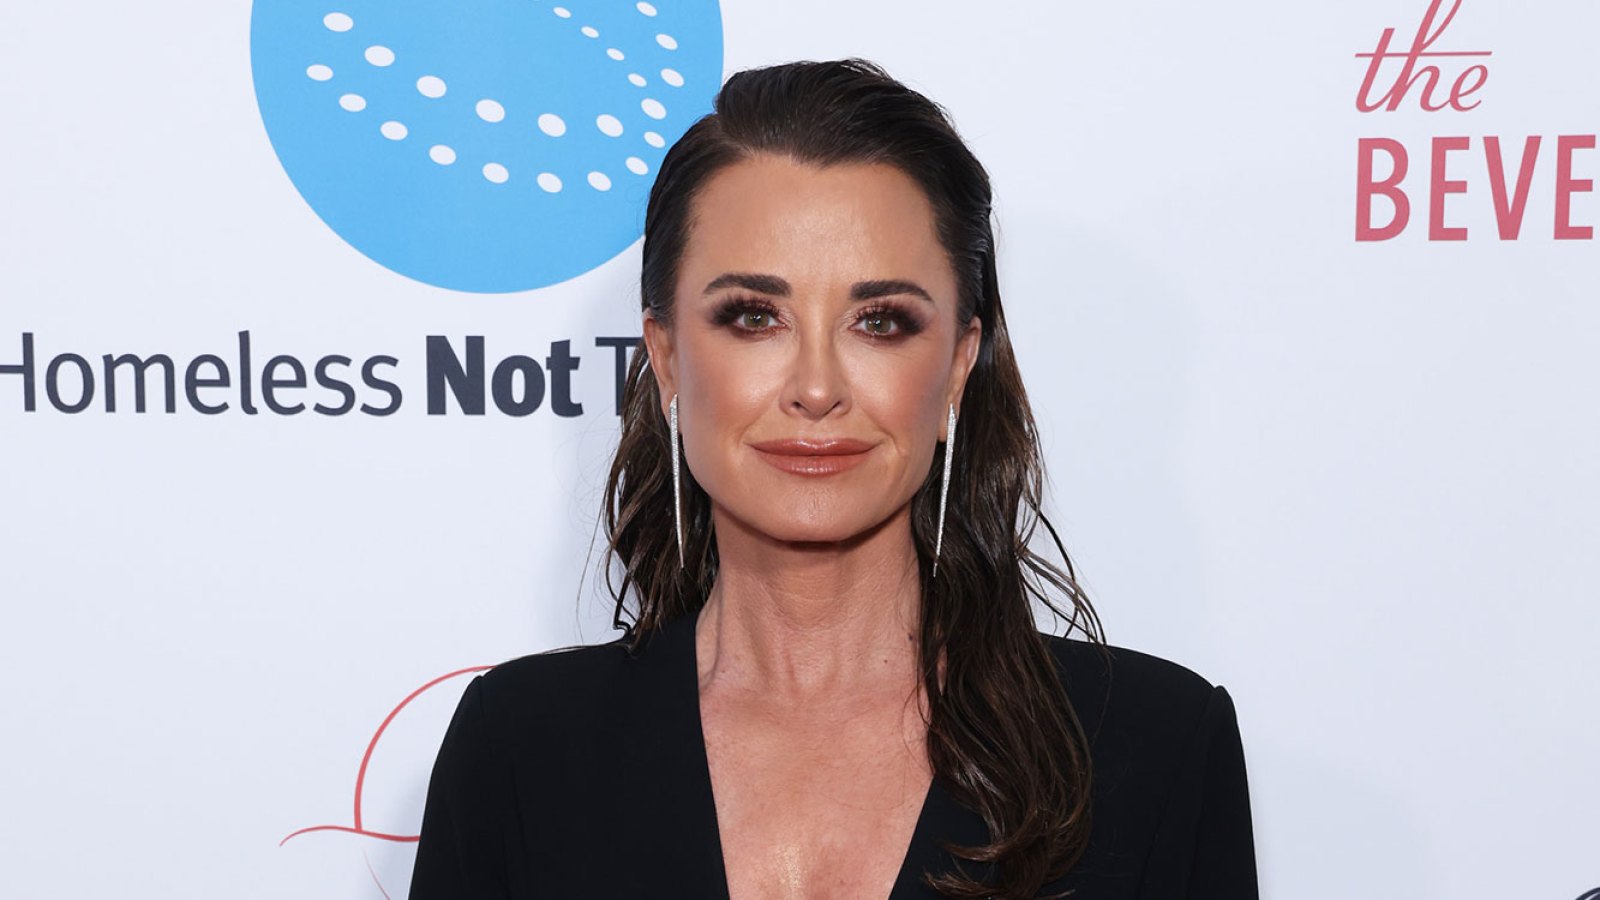 Kyle Richards is Obsessed with These New Balance Sneakers: ‘Light As a Feather’